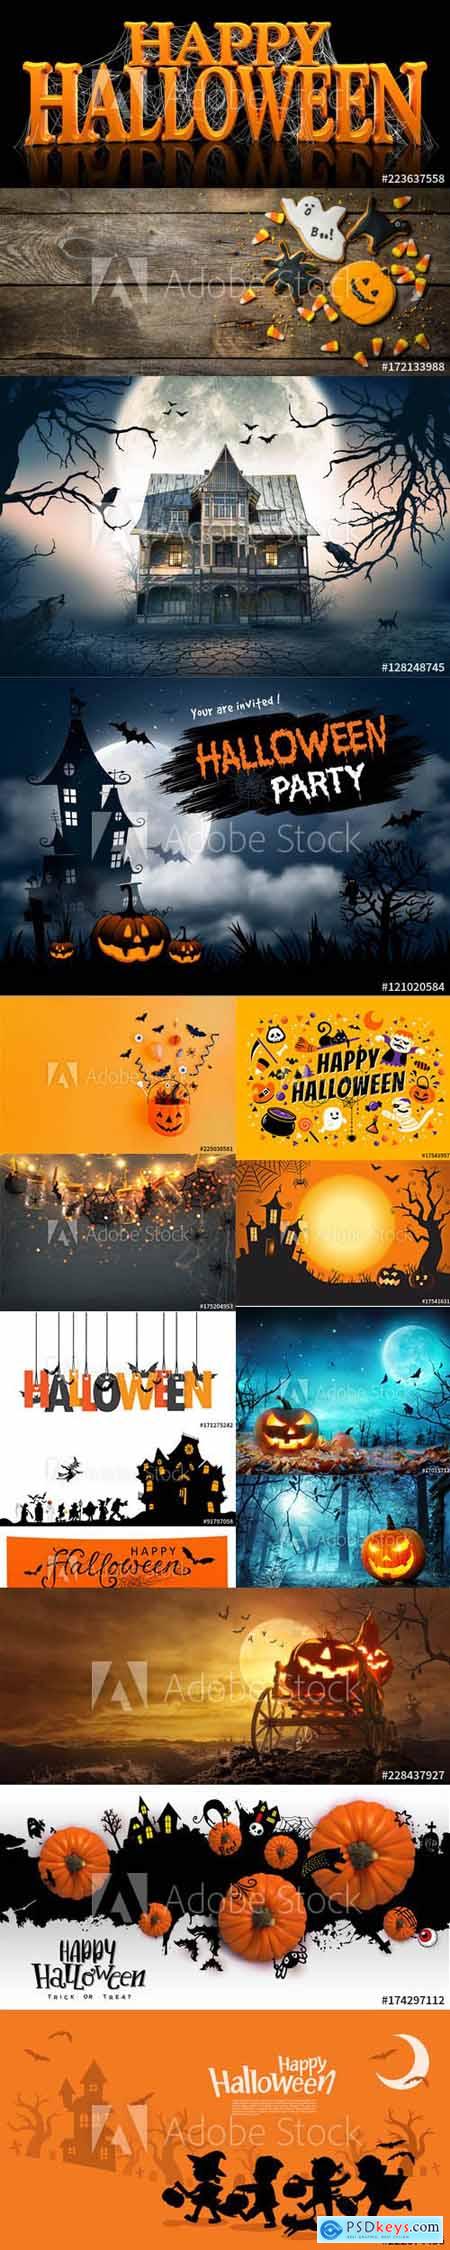 Set of Happy Halloween Background and Elements vol3